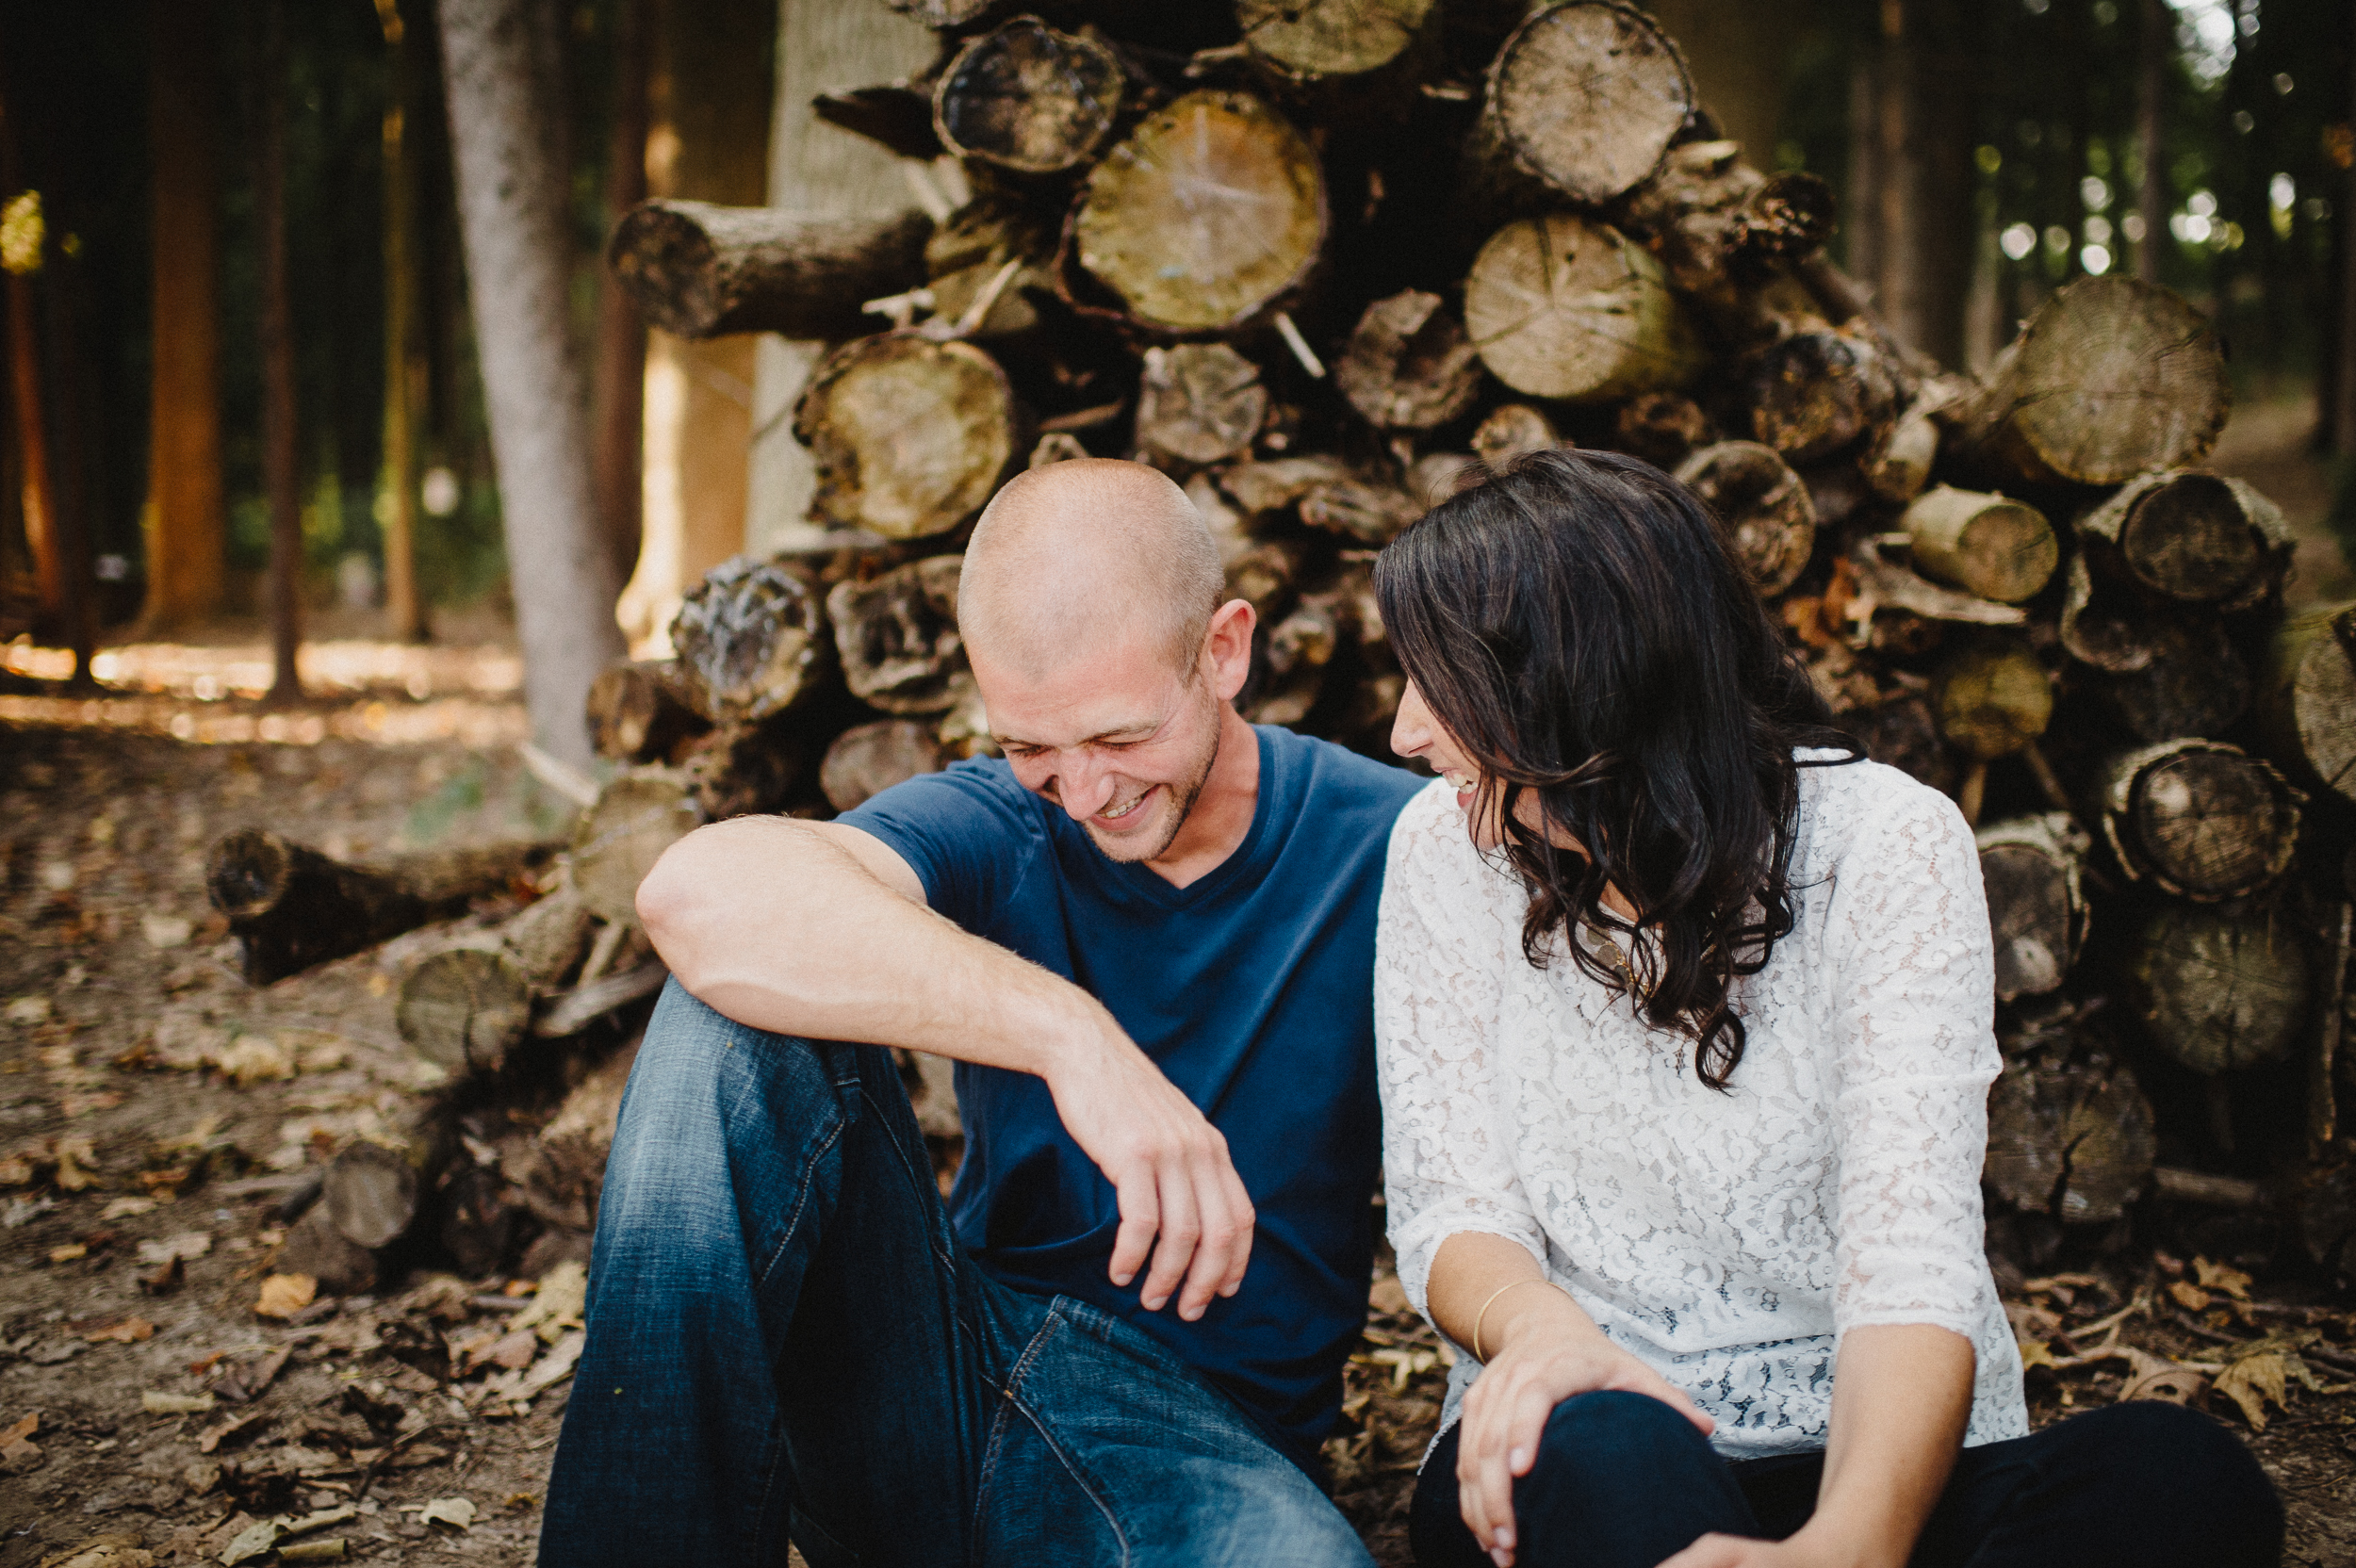 pat-robinson-photography-pa-engagement-session-7.jpg